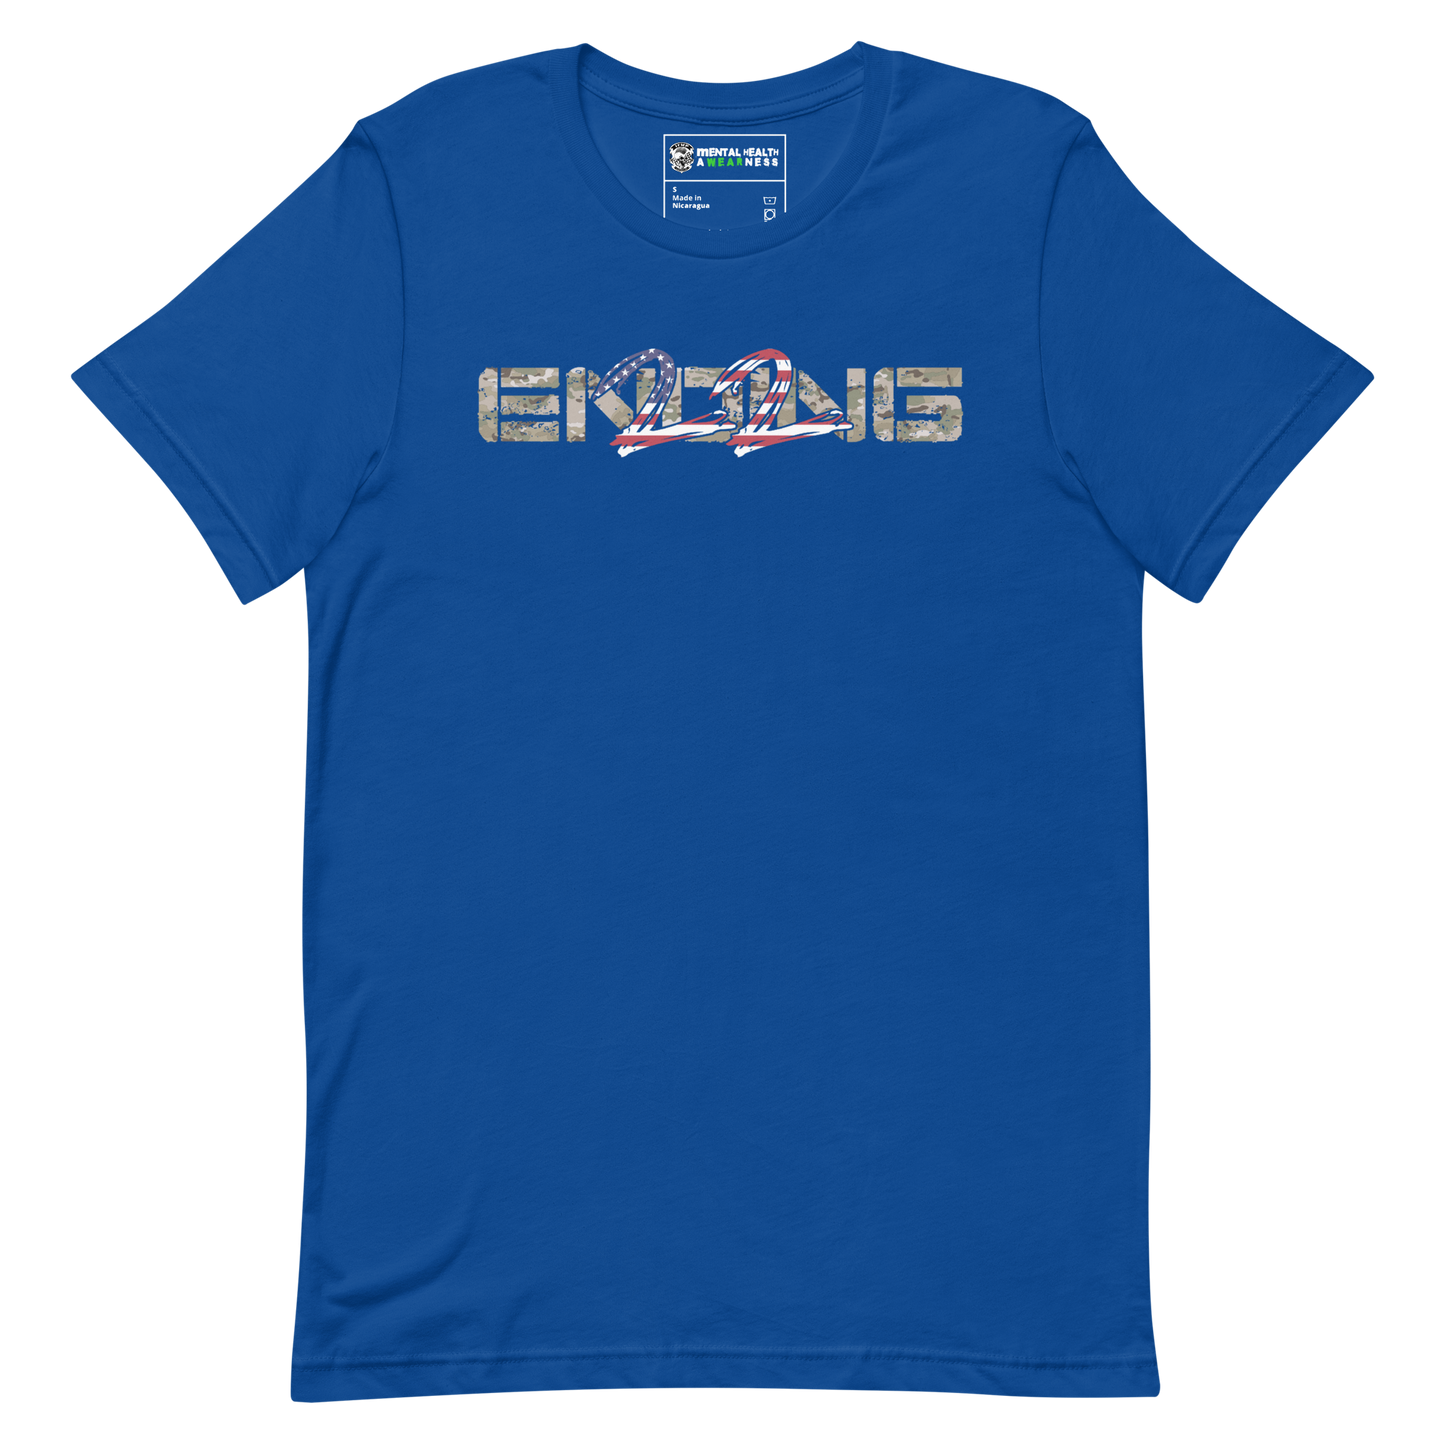 ENDING 22 Army "Grunt" Edition True Royal T-Shirt Front